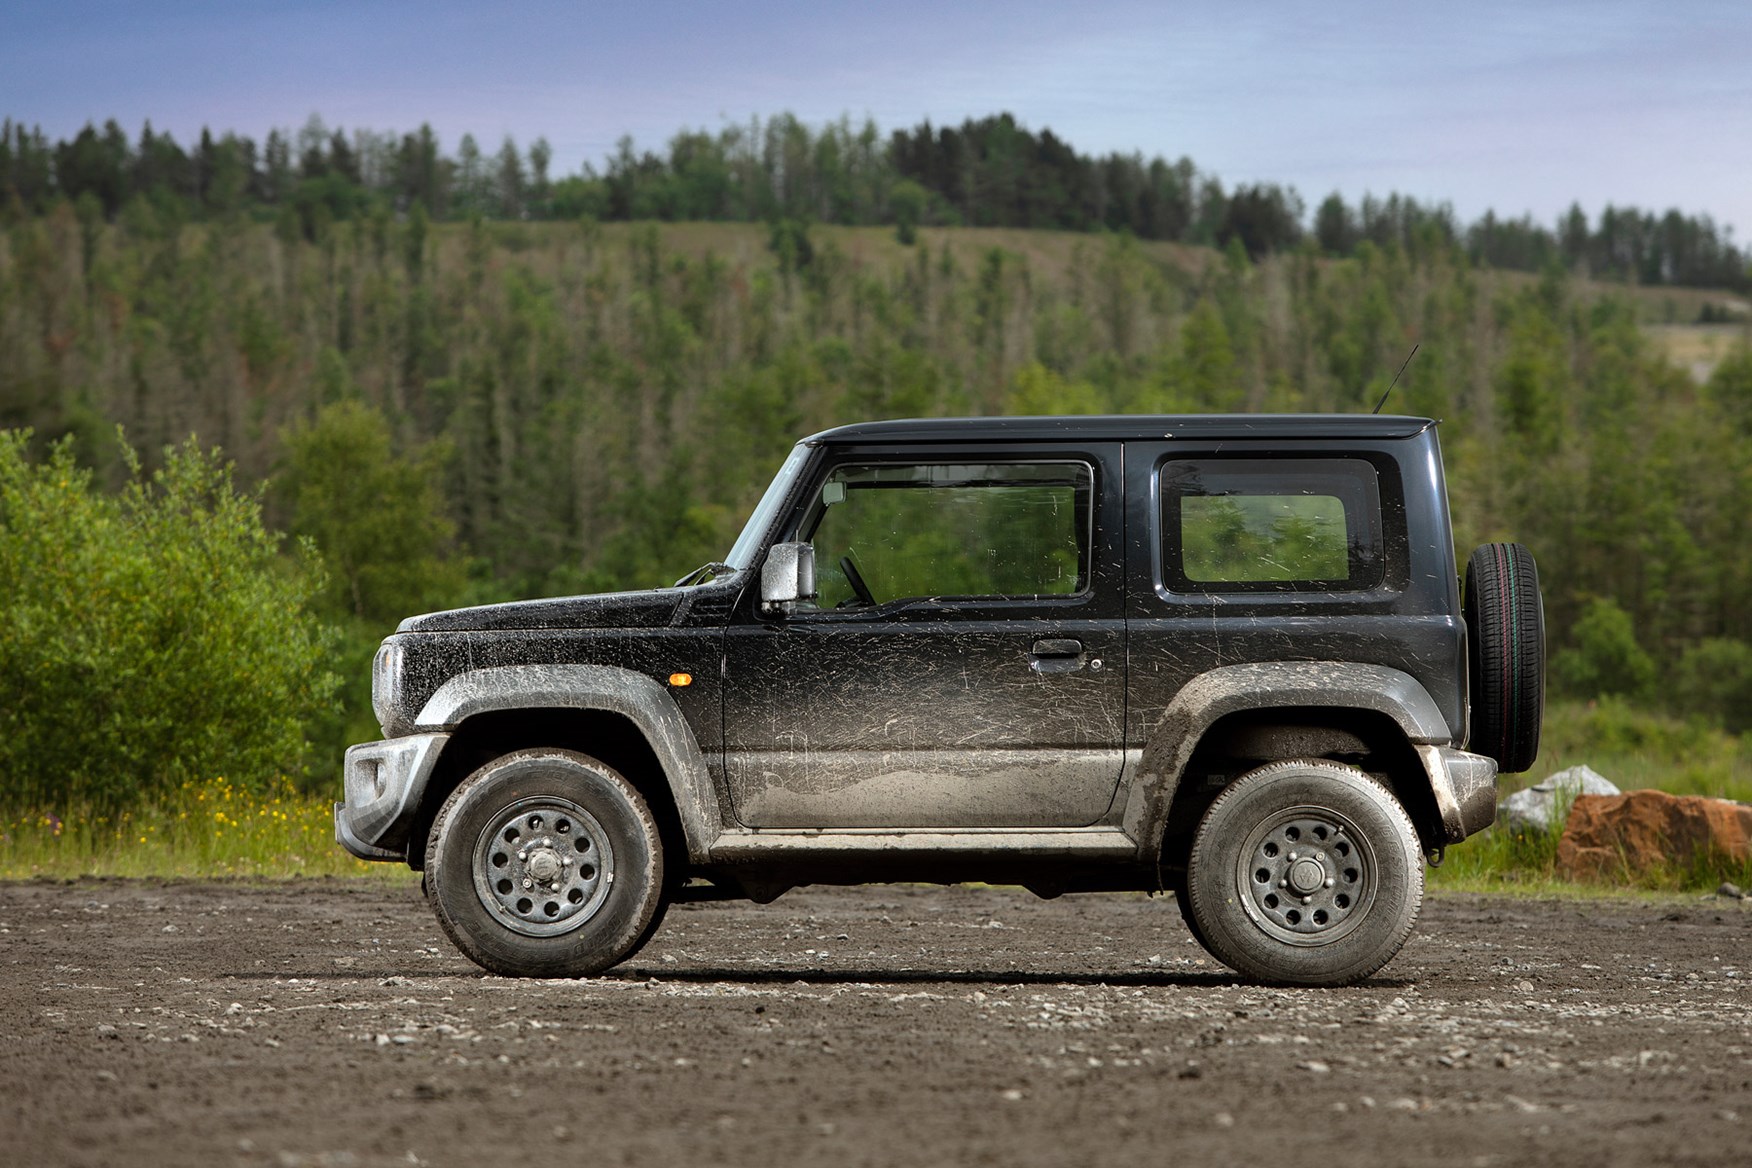 Suzuki Jimny commercial 4x4 review, 2021, side view, black